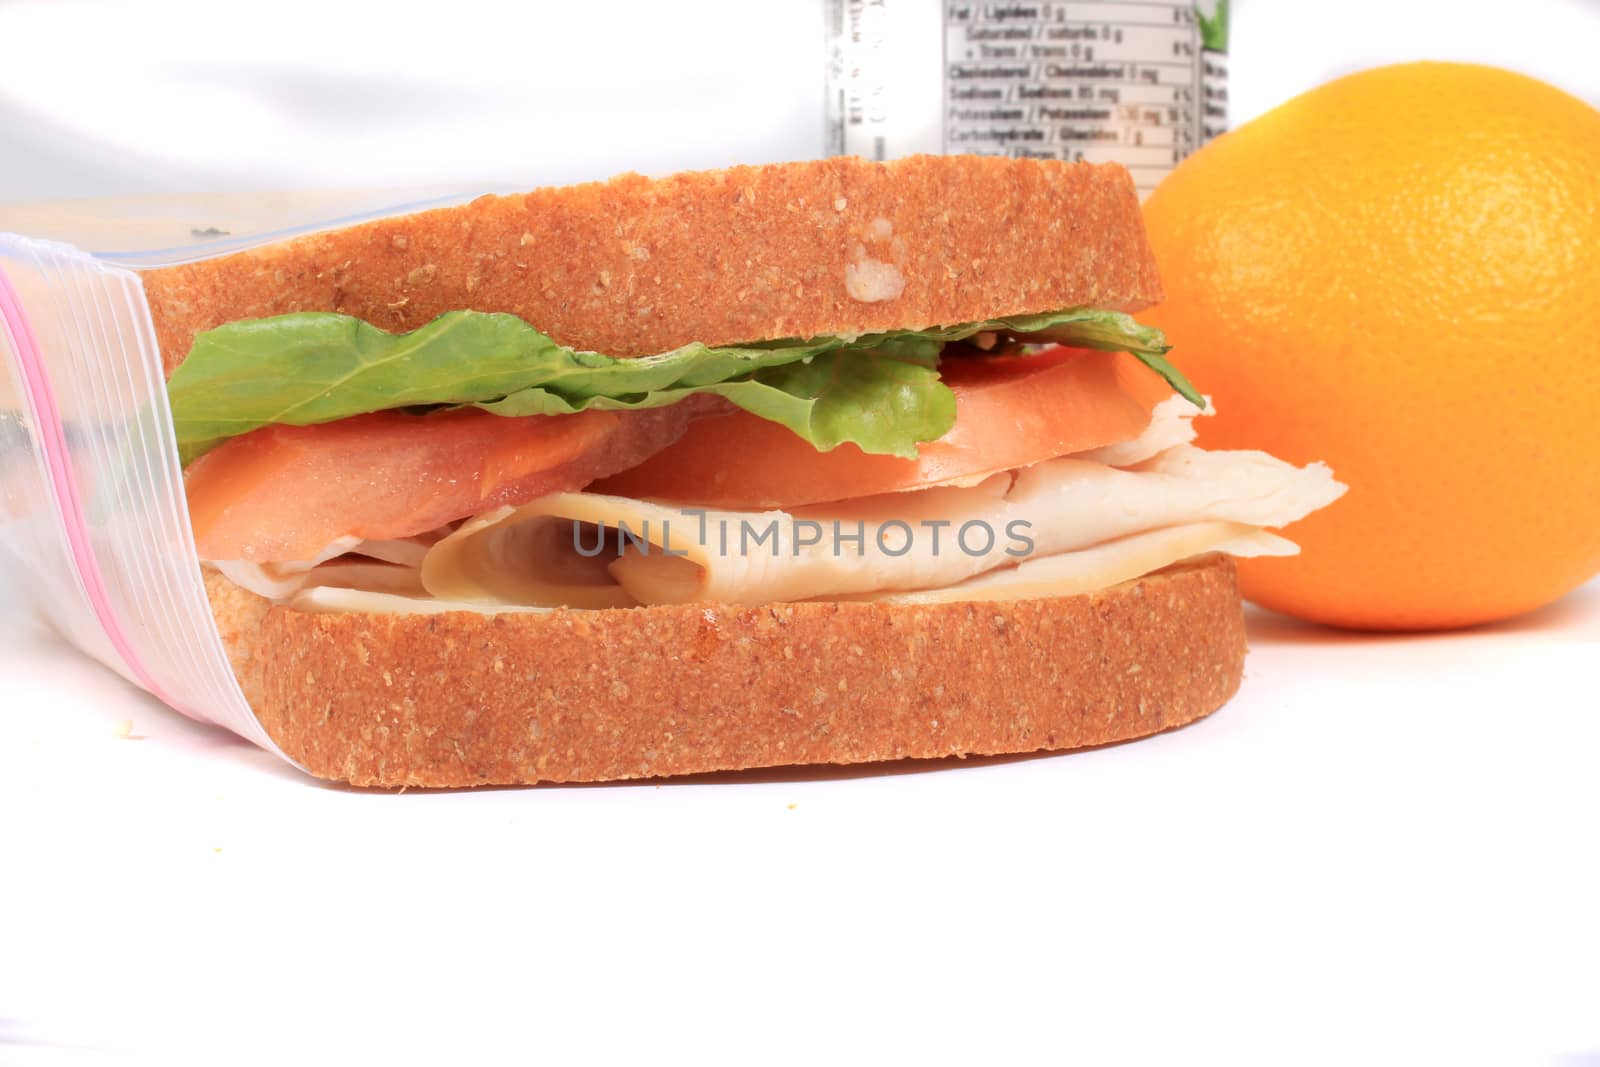 Turkey and cheese sandwich on whole wheat bread with tomato and lettuce inside a zipped bag ready for lunch and orange on the side